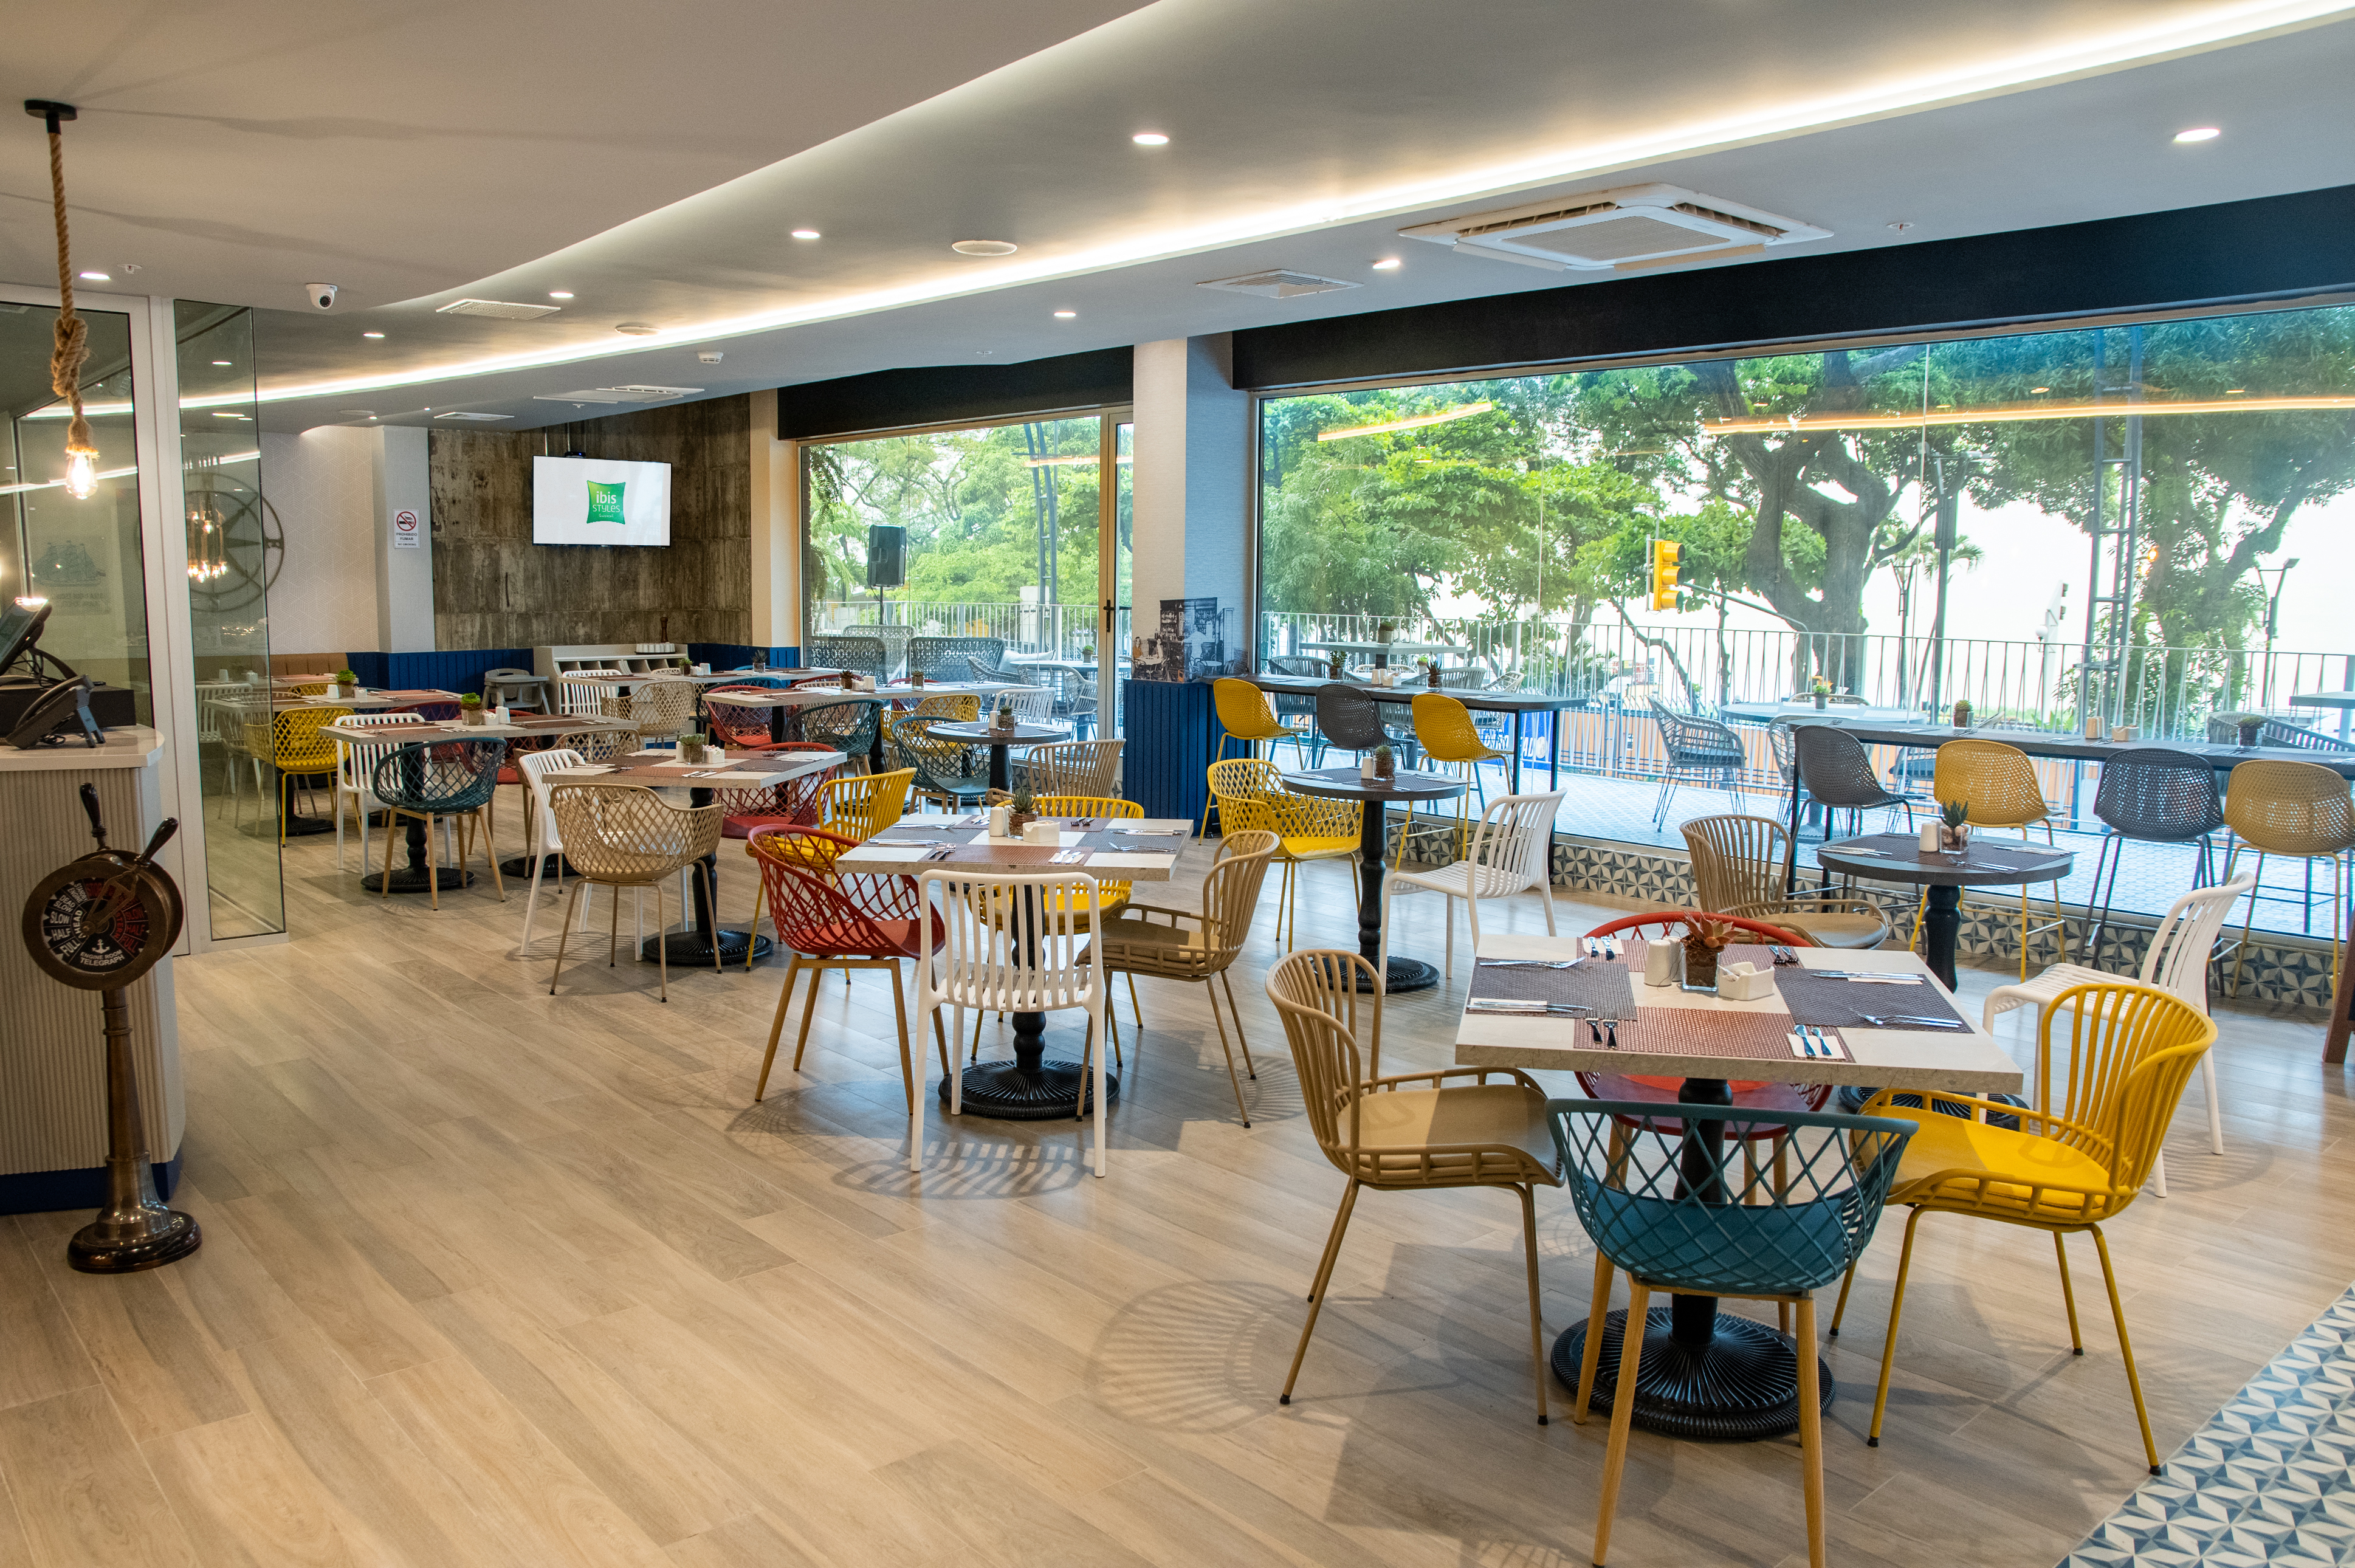 The new ibis Styles Guayaquil Hotel adds 203 new rooms, 6 of them for guests with disabilities; restaurant, Business Center with meeting rooms and free Wi-Fi are part of its offer.